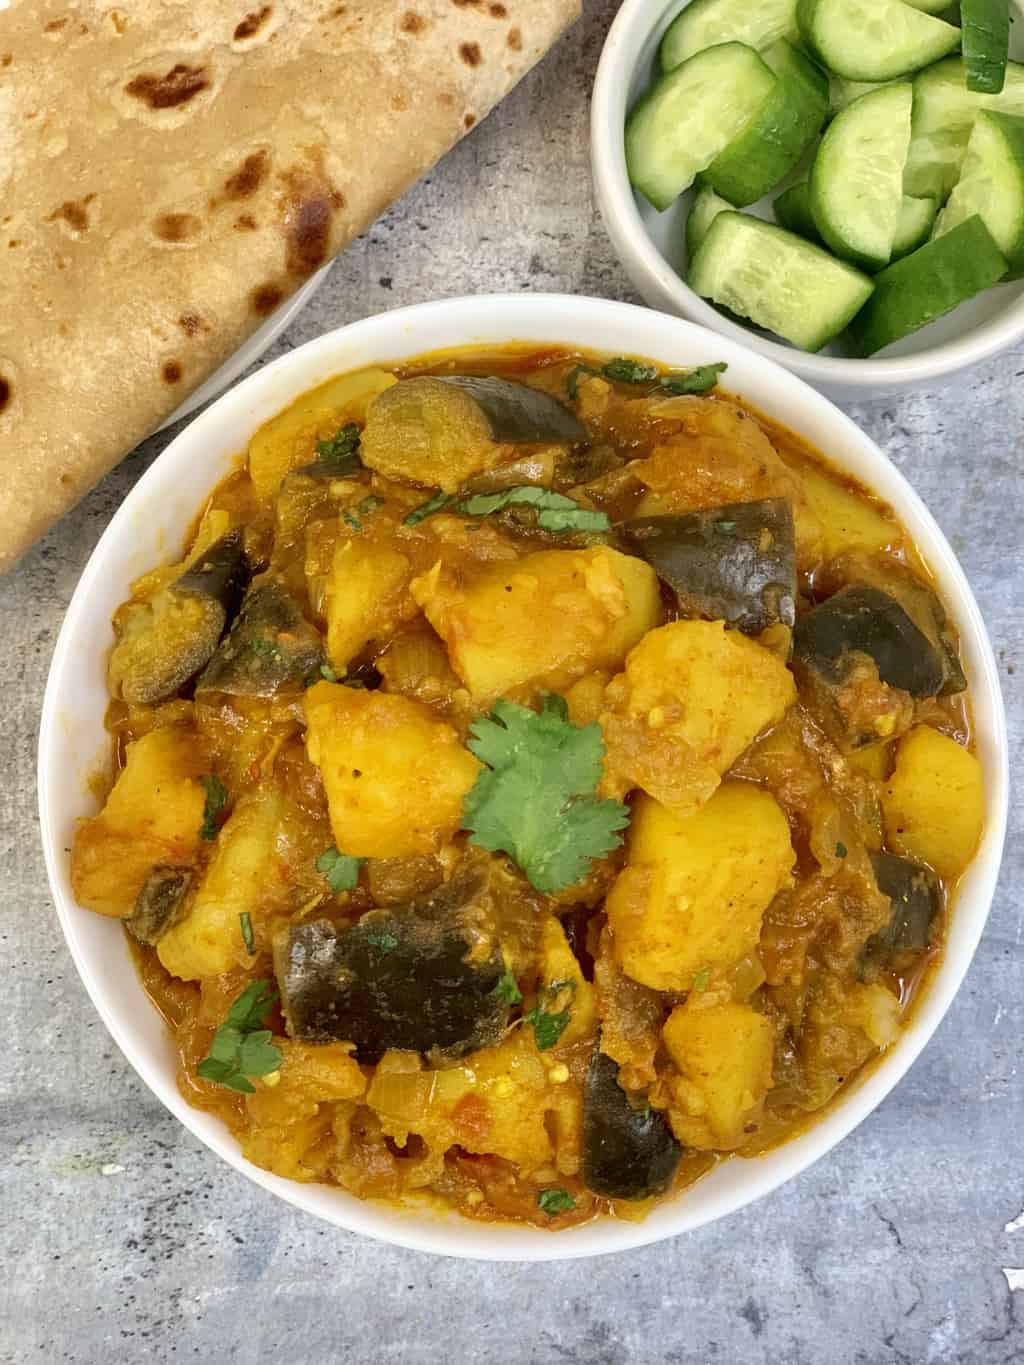 potato eggplant curry served in a bowl with chapati and chopped cucumber on the side